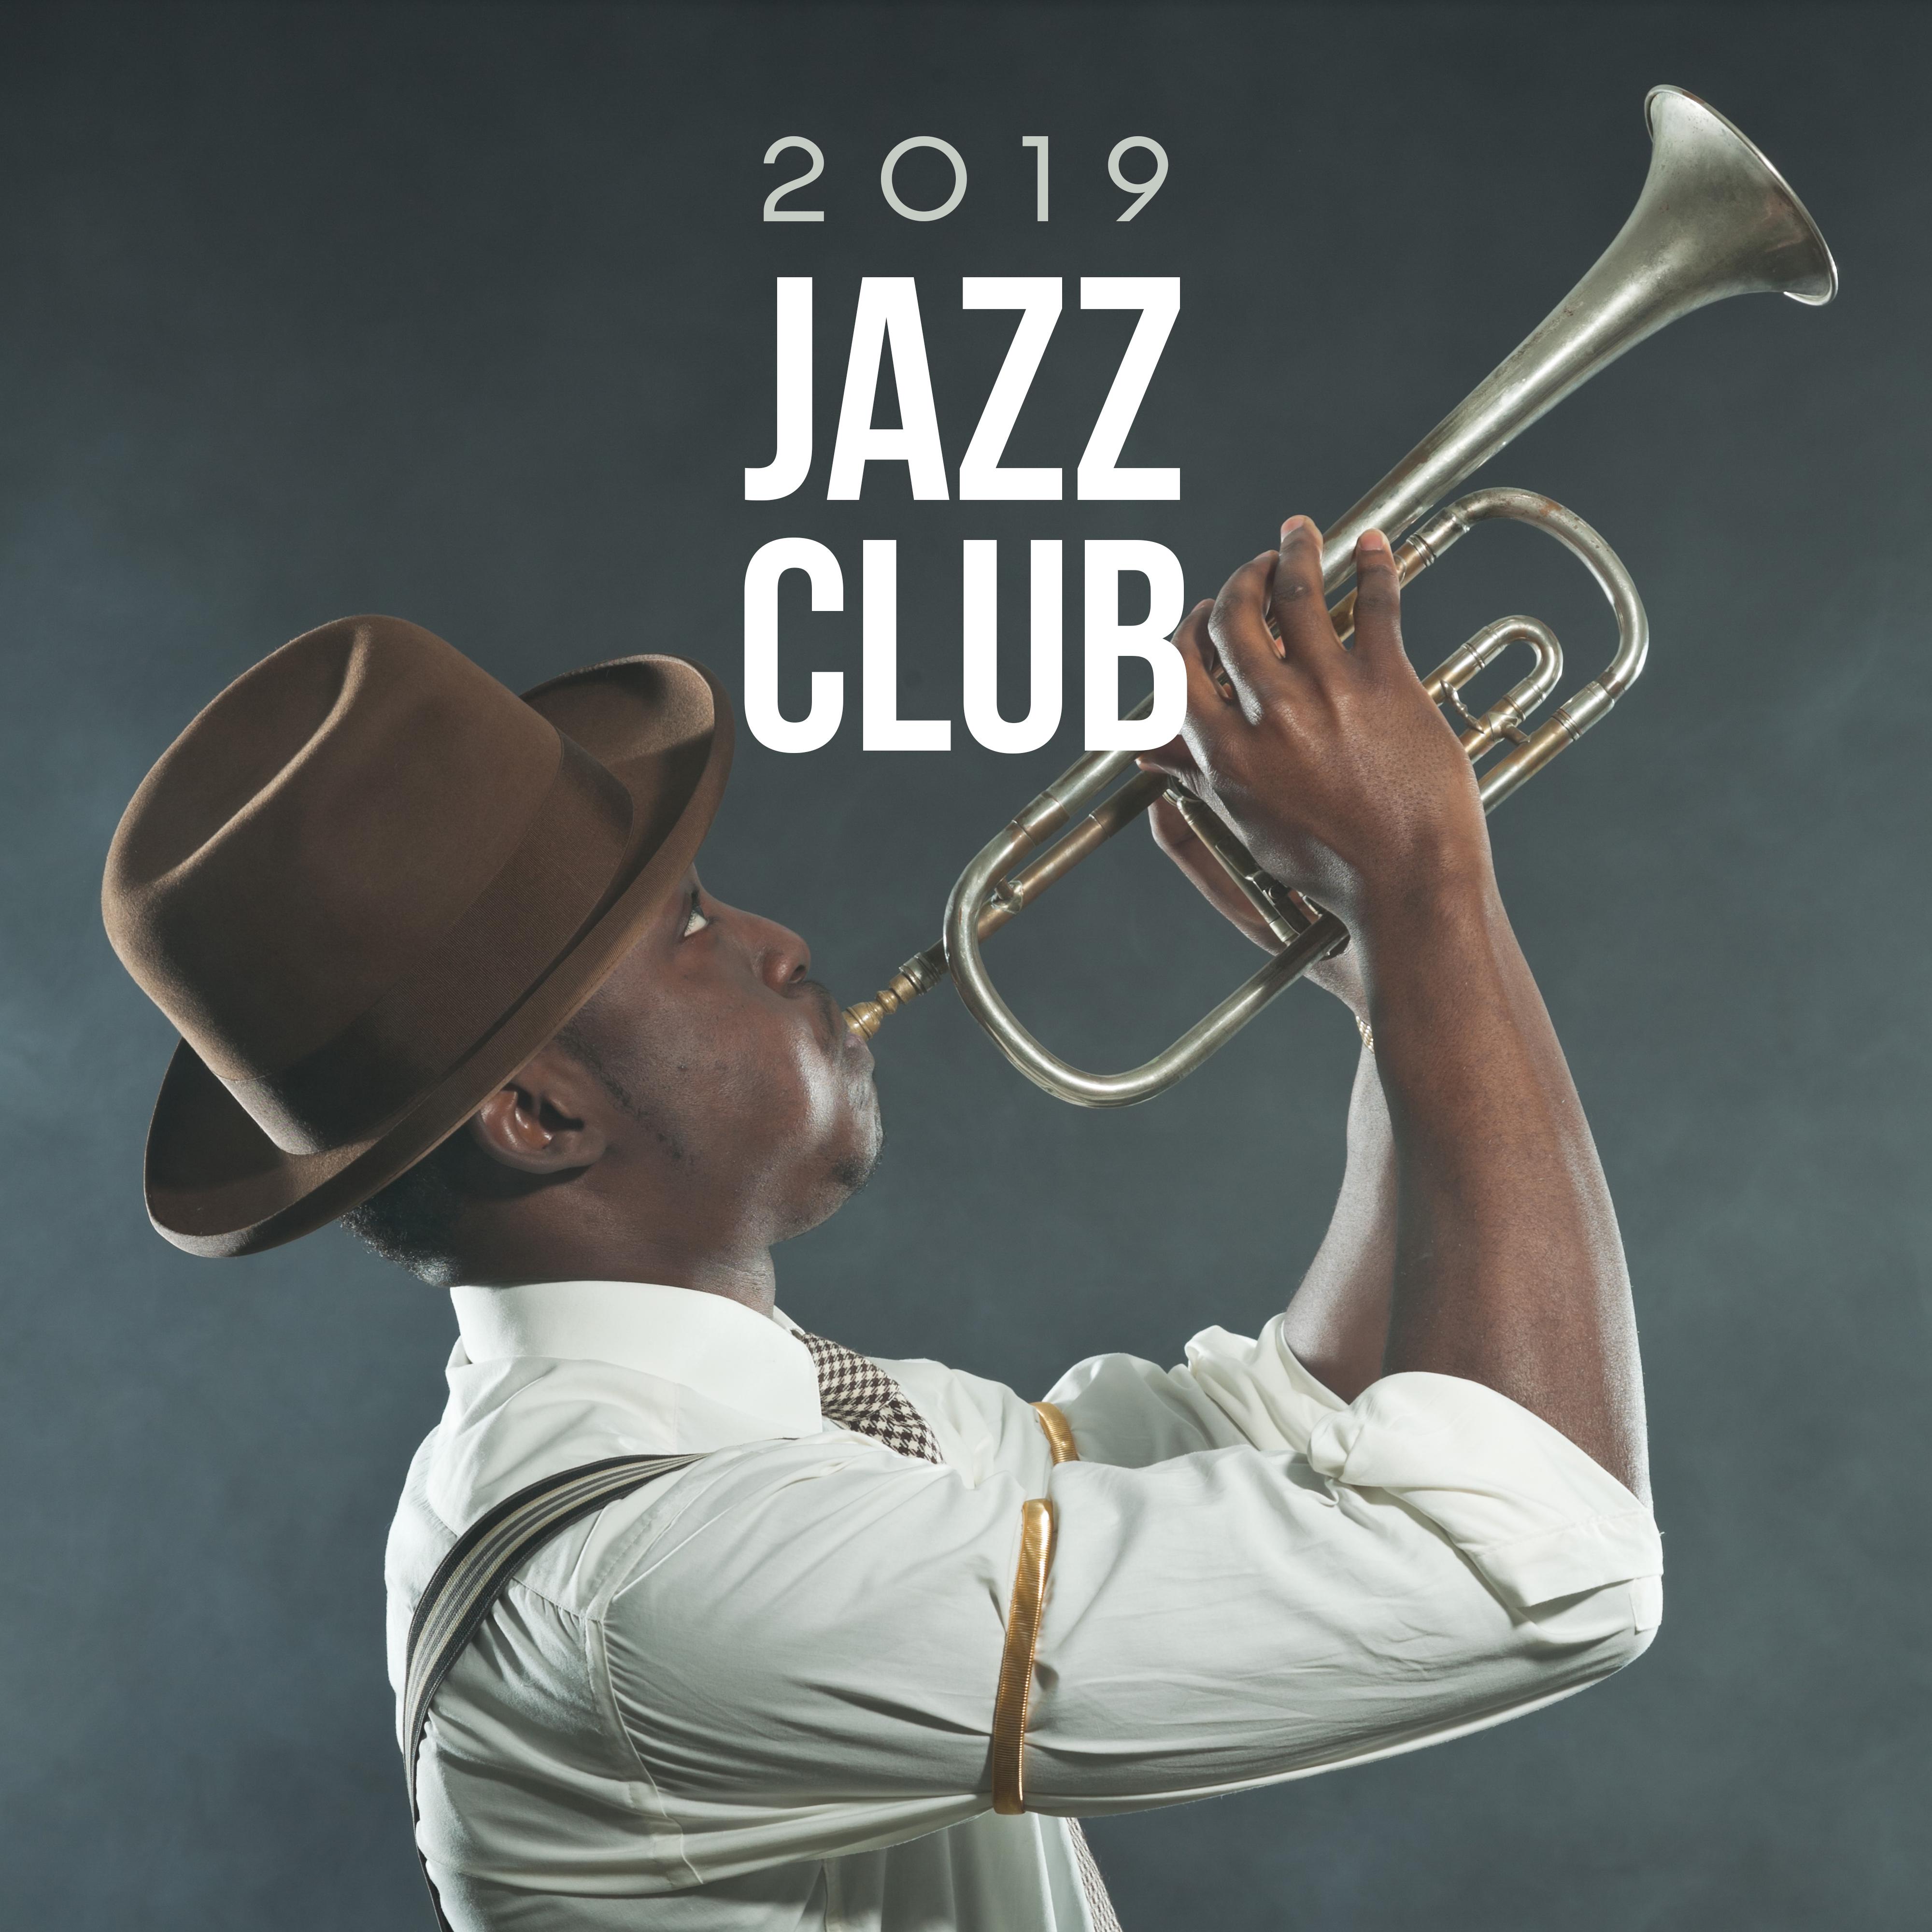 2019 Jazz Club – Party Hits, Instrumental Jazz Music Ambient, Relaxing Music After Work, Perfect Gentle Jazz, Lounge Bar